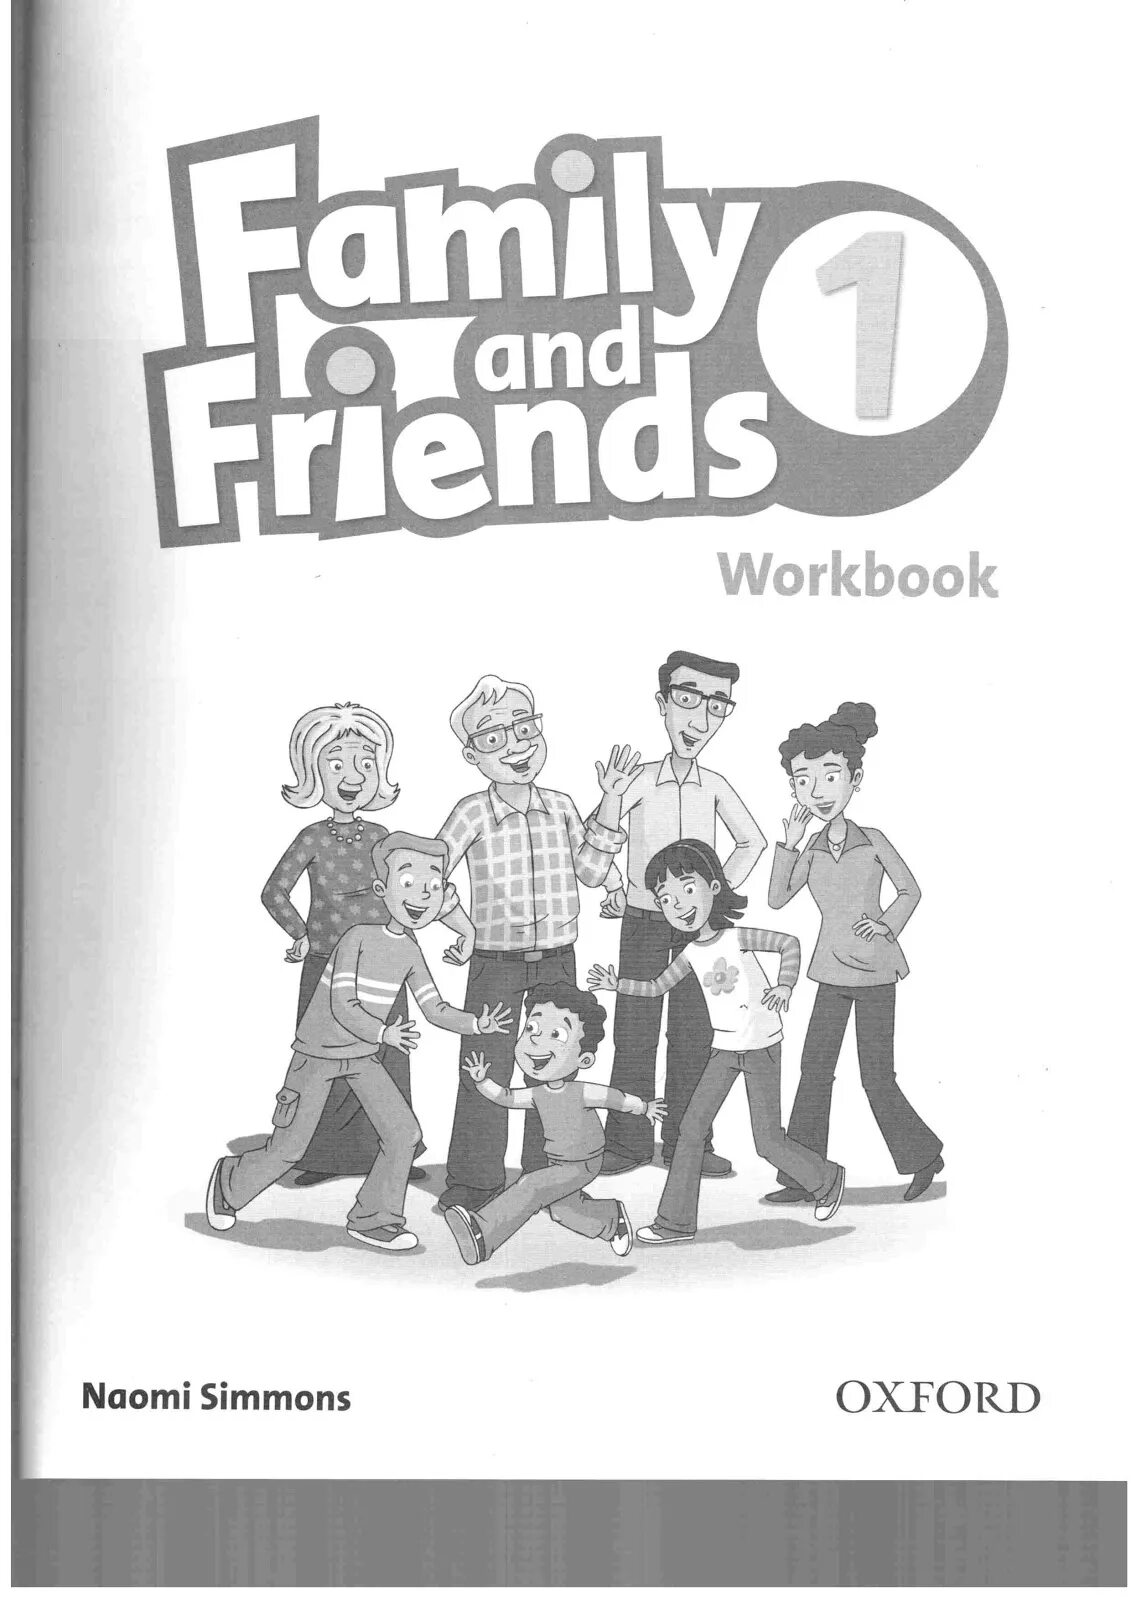 Family and friends students. Английский Naomi Simmons. Naomi Simmons Family and friends 1. Family and friends 1 Workbook 2nd Edition гдз. Английский язык Family and friends 1 Workbook стр53.